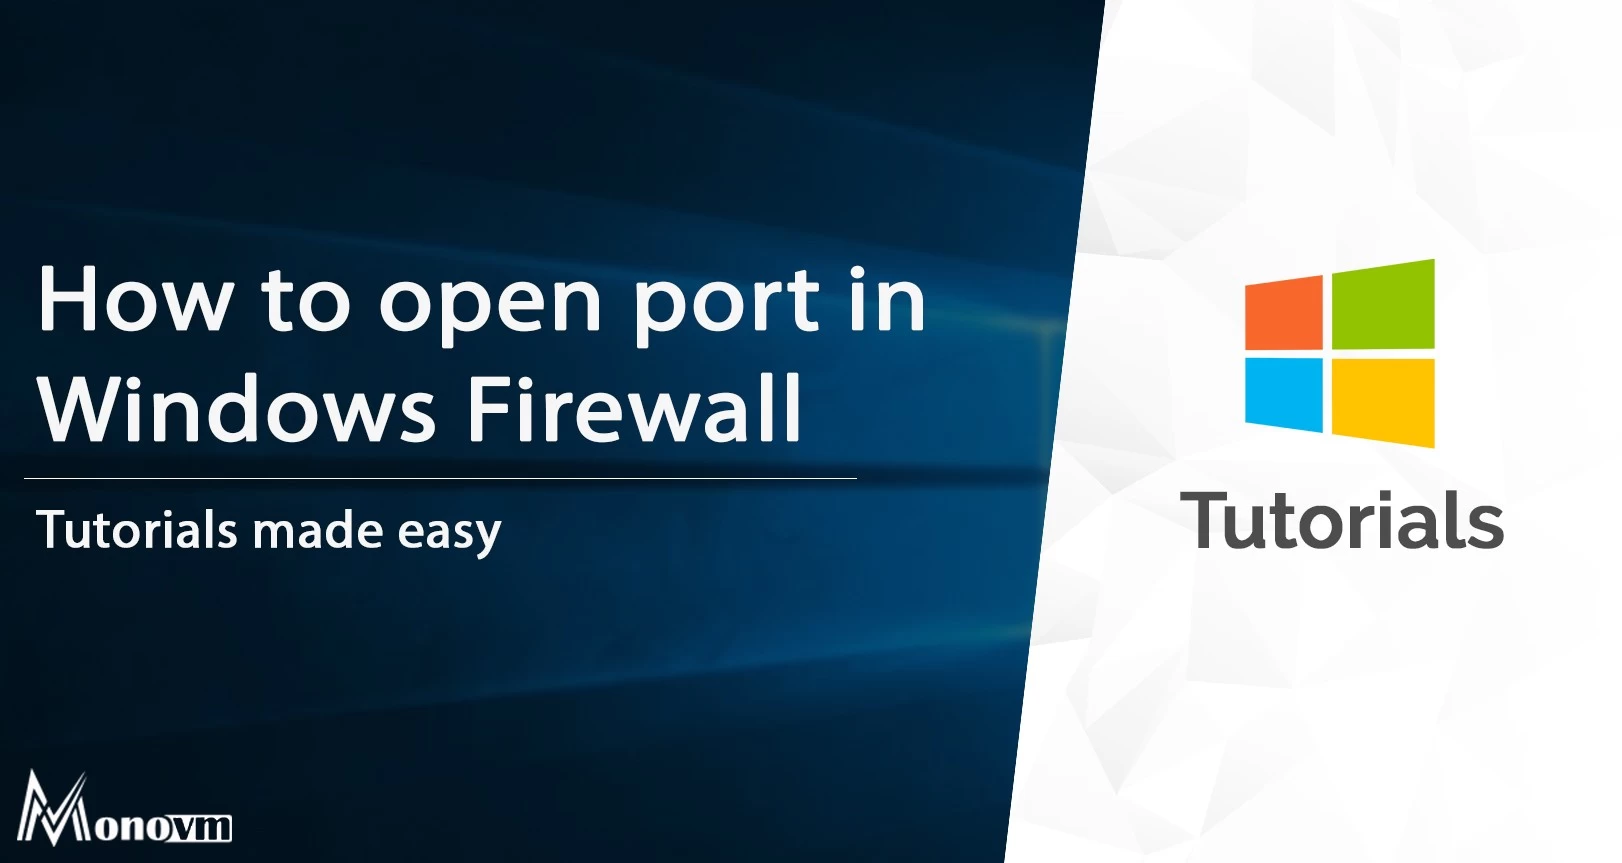 How to Open Port in Windows Firewall